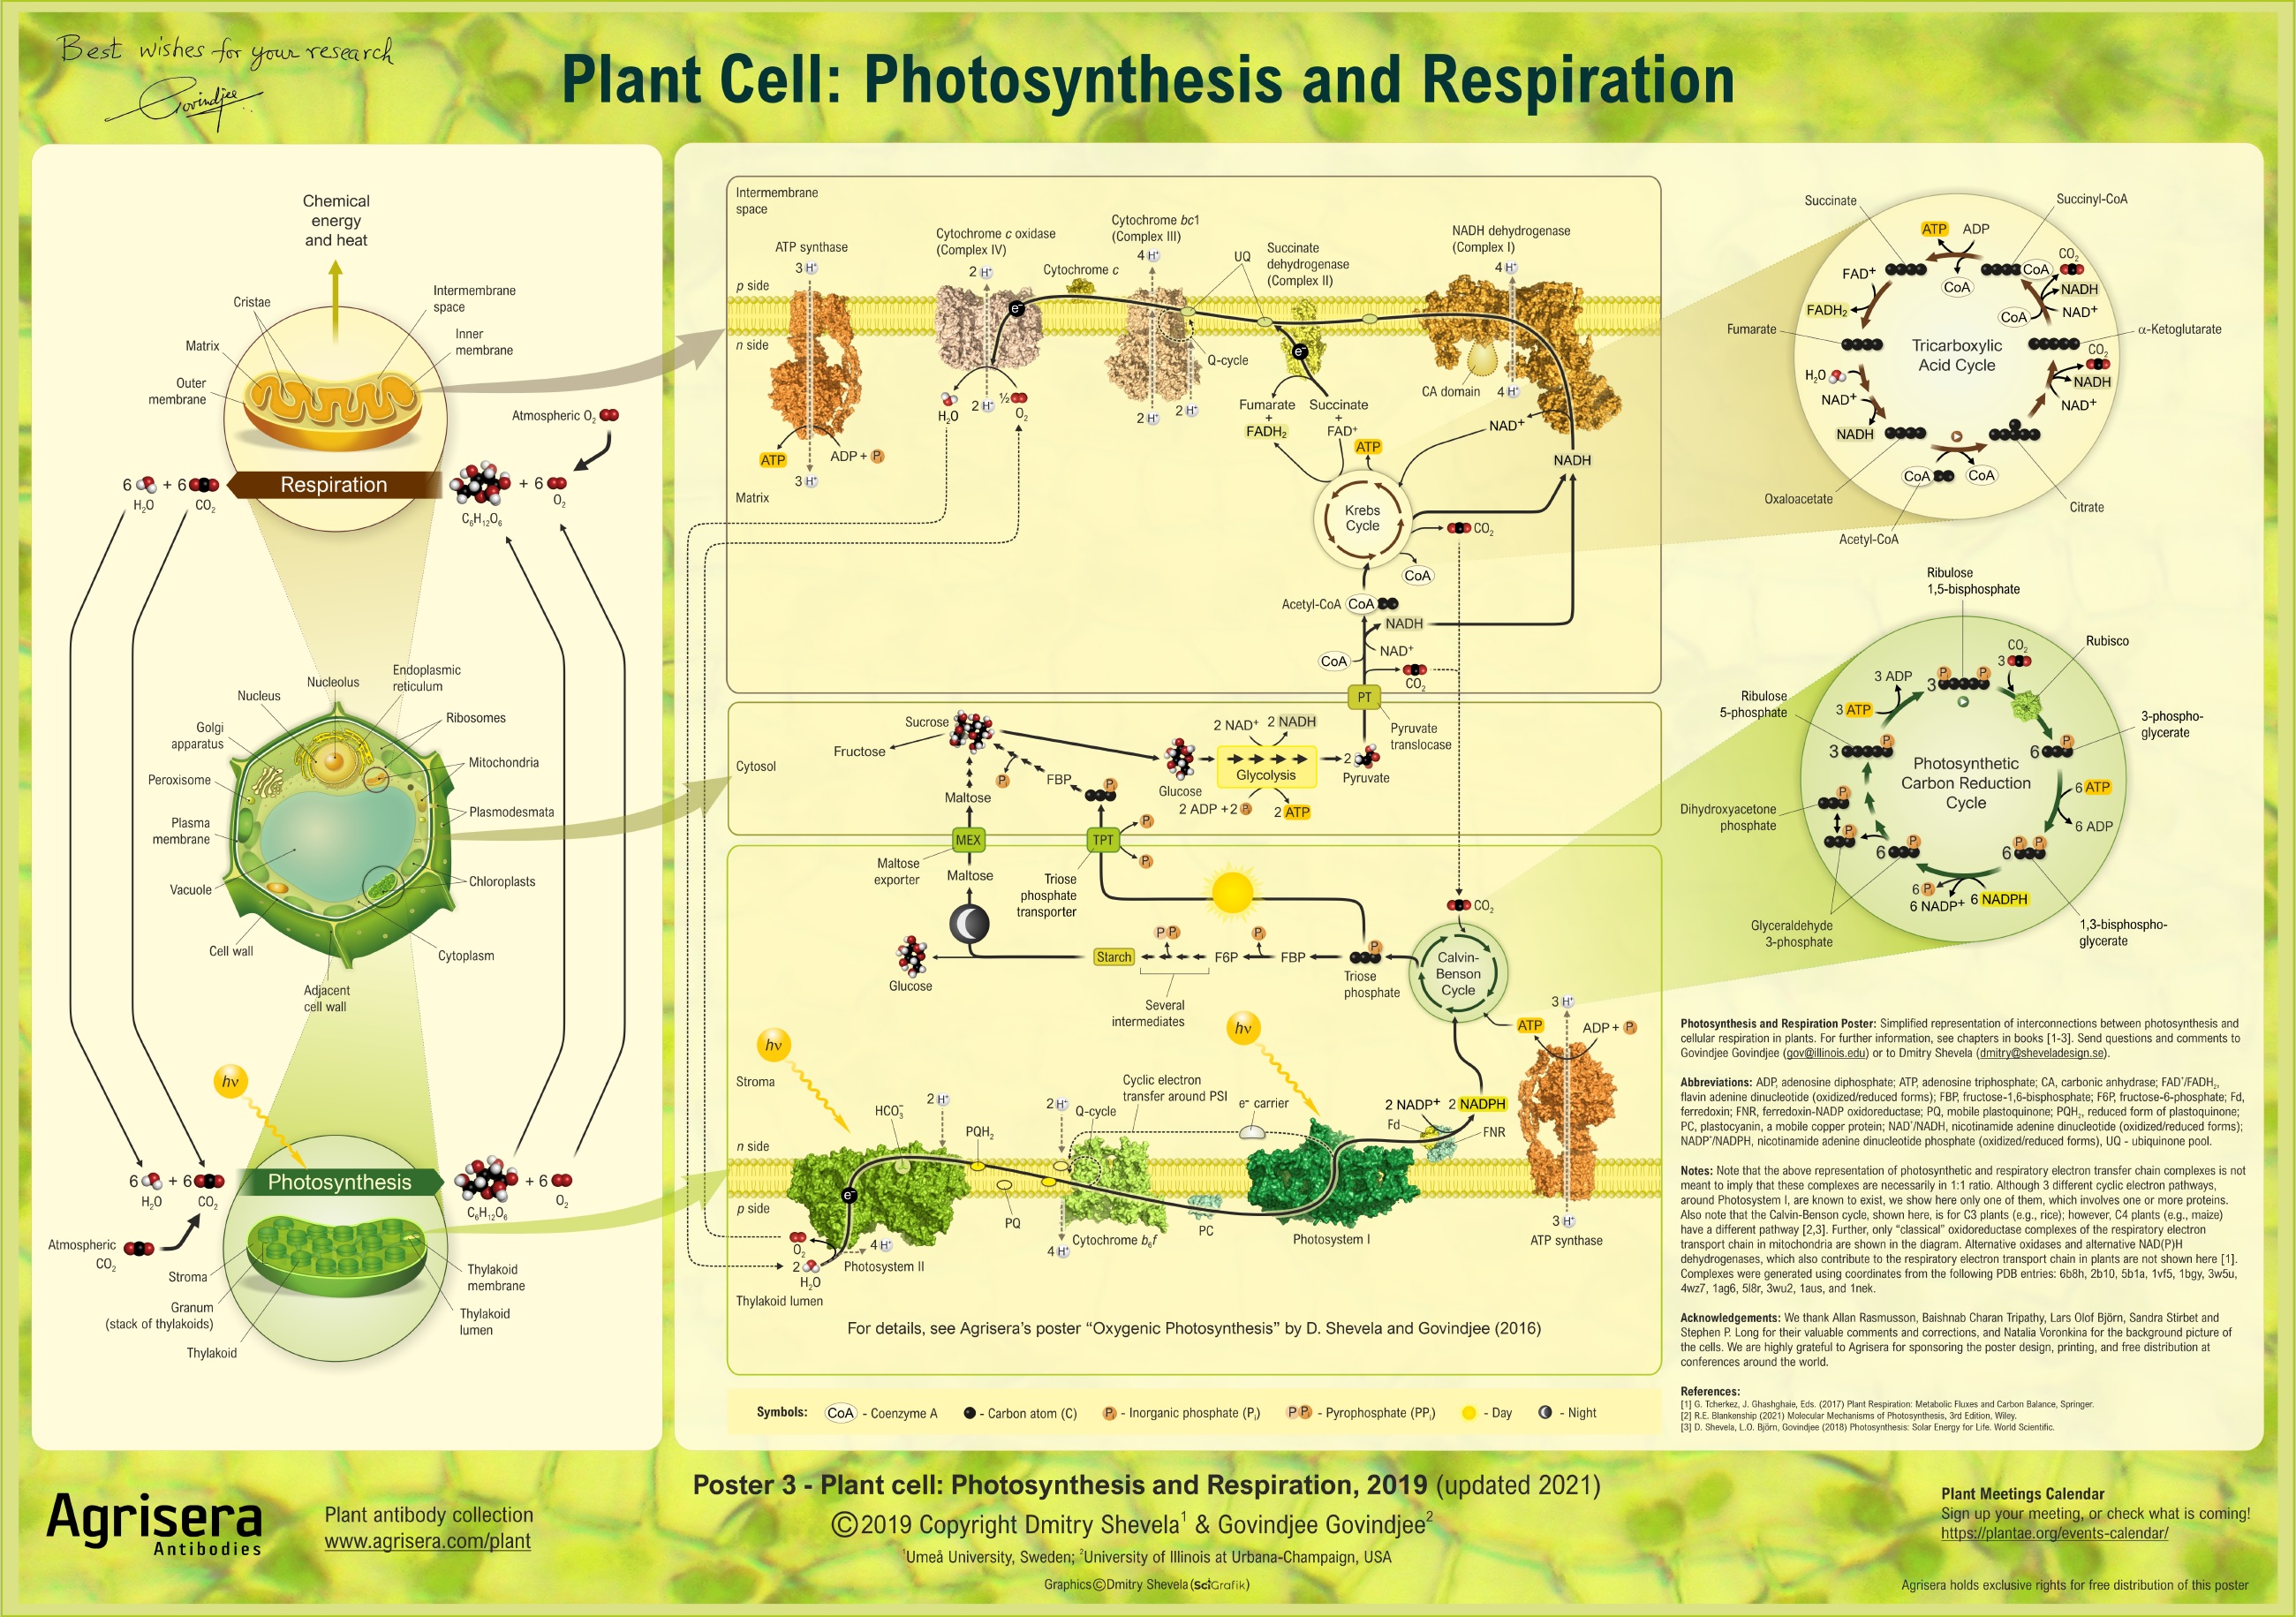 Agrisera Poster 3: Photosynthesis and Respiration